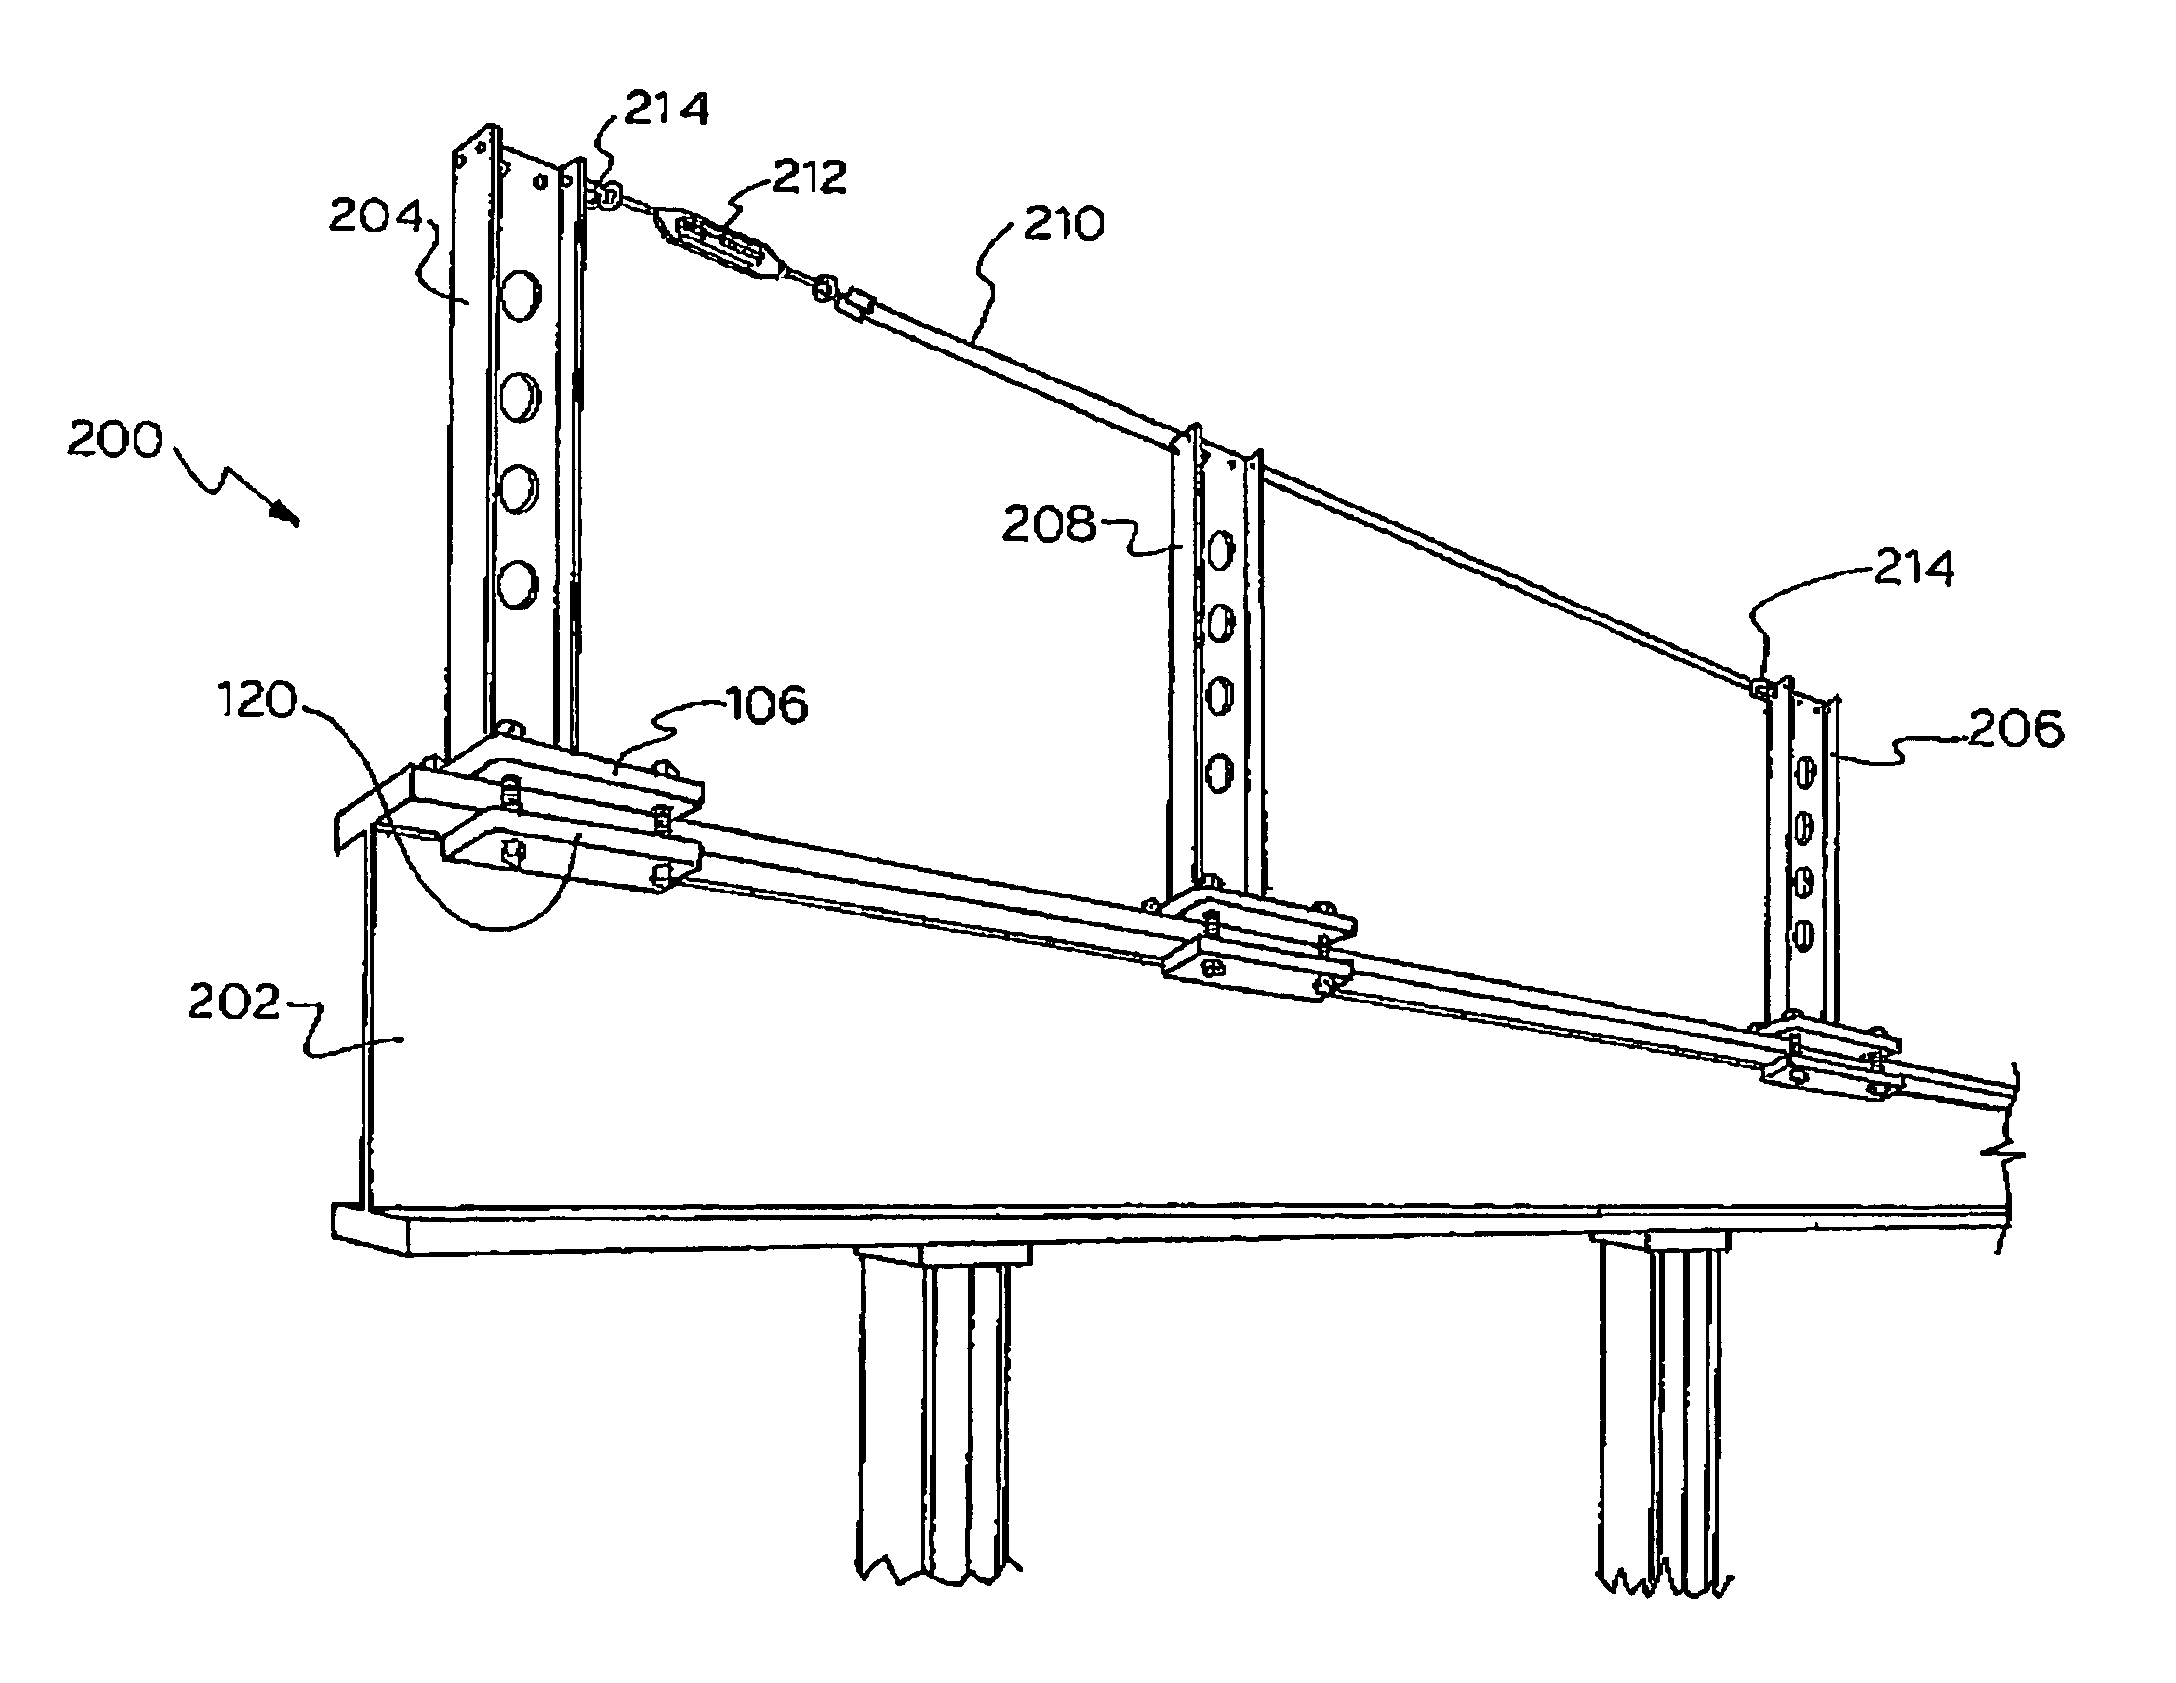 Safety apparatus for arresting the fall of a worker